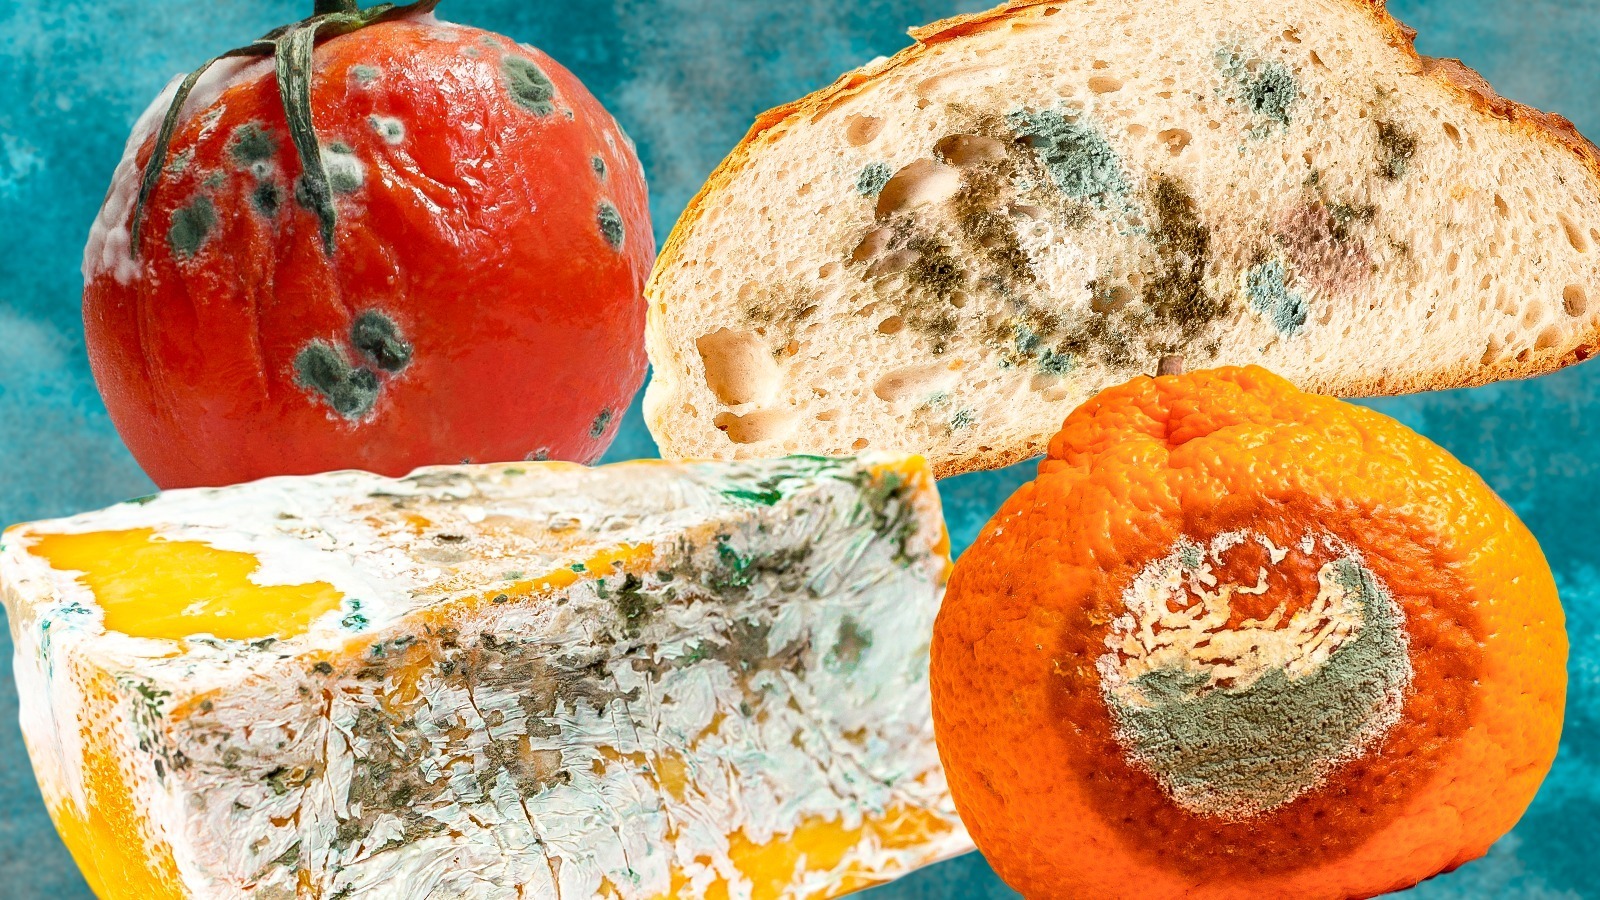 https://www.tastingtable.com/img/gallery/12-foods-you-can-and-cant-salvage-once-they-grow-mold/l-intro-1698934698.jpg